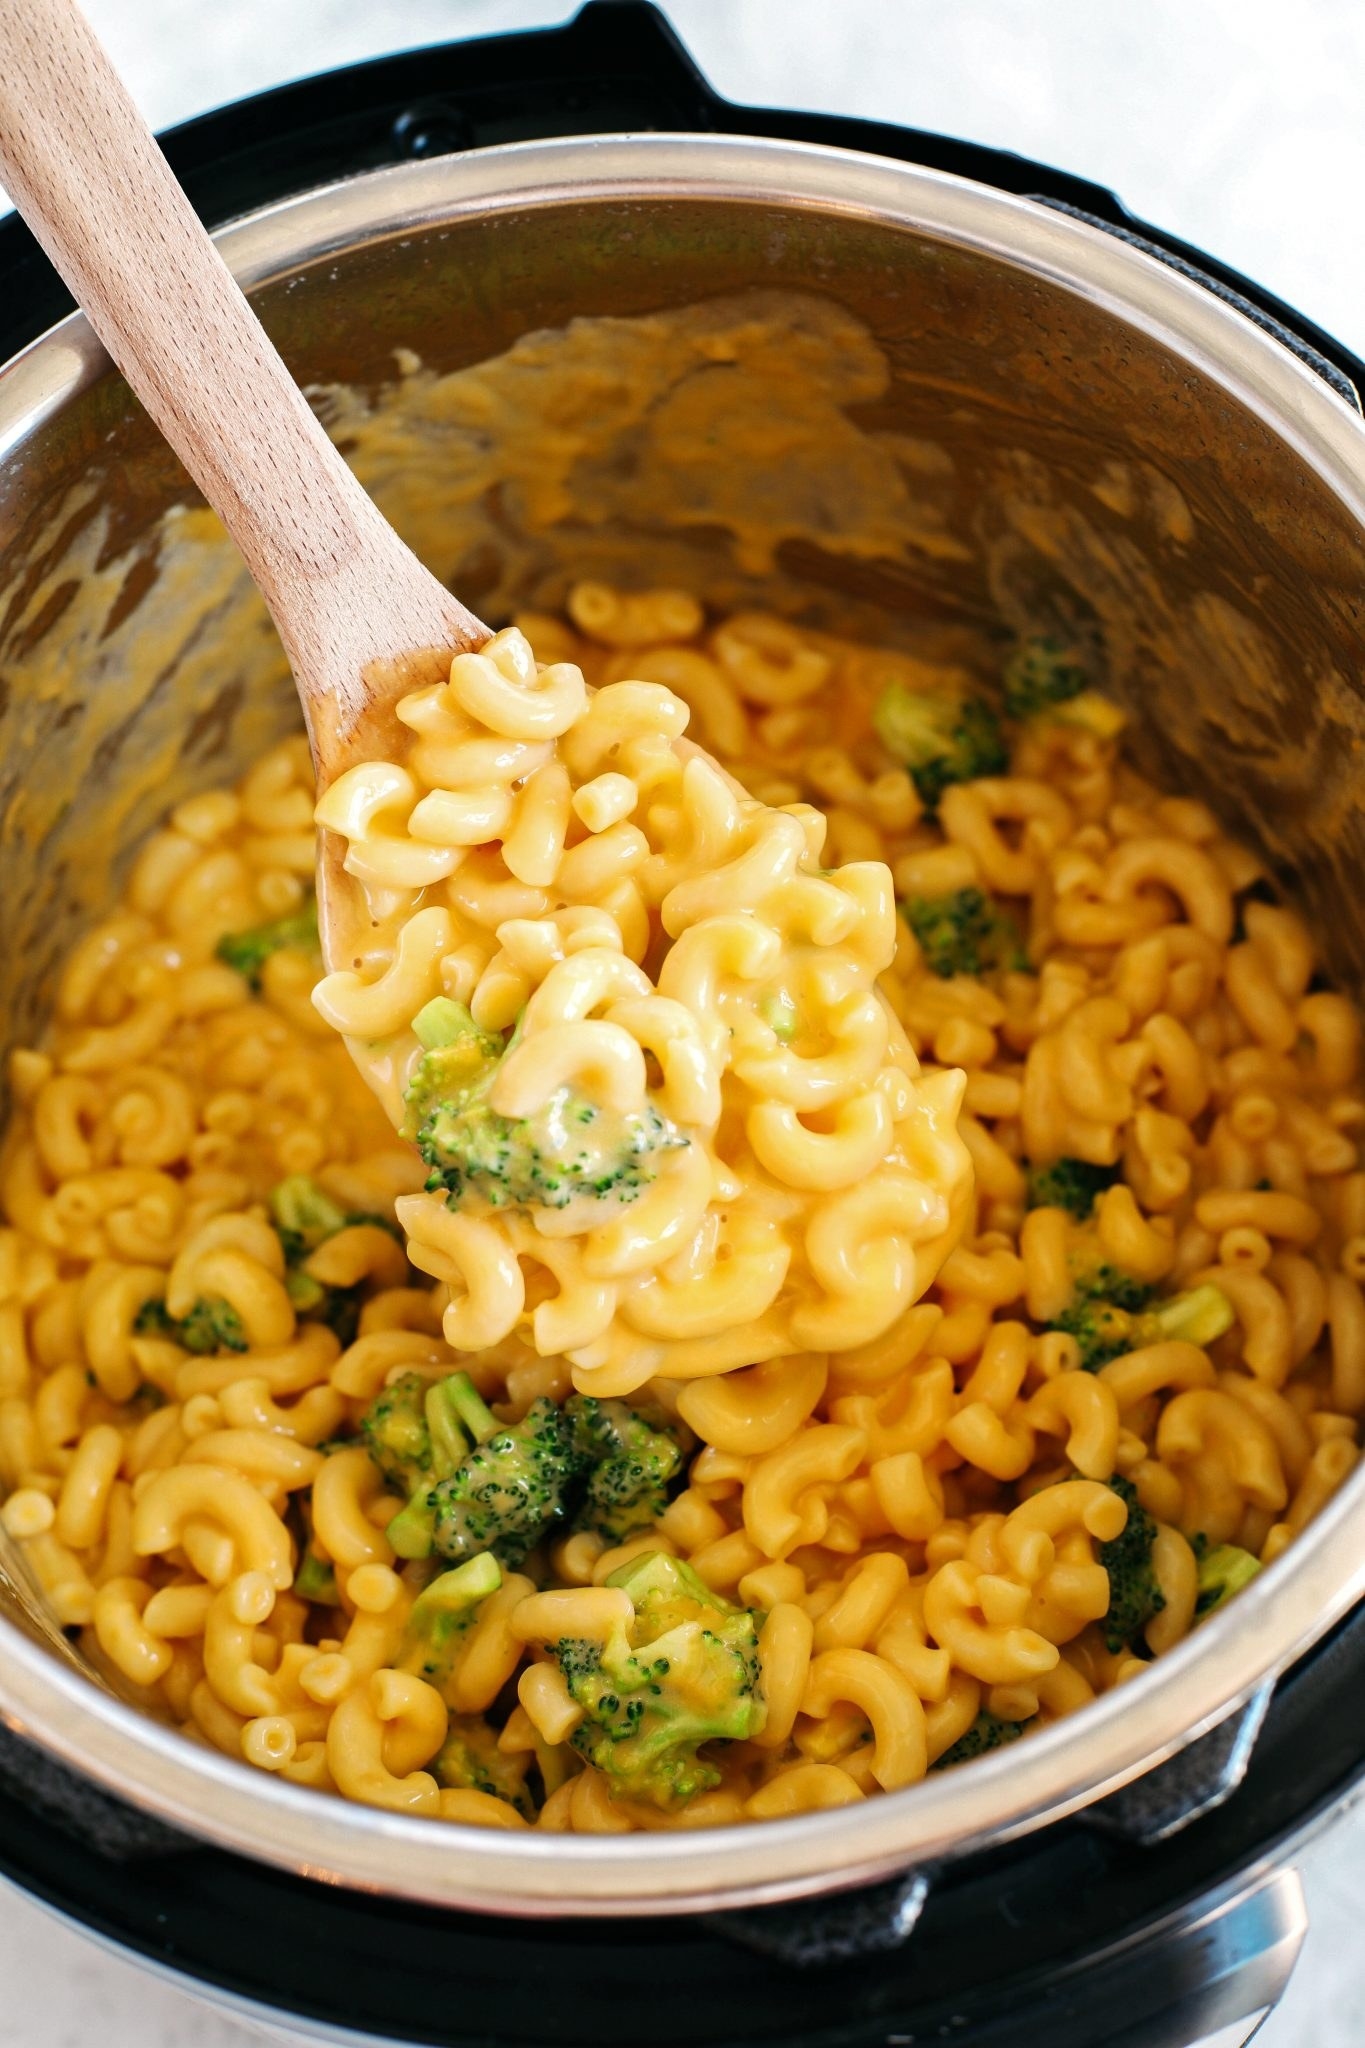 Macaroni with broccoli in an Instant Pot